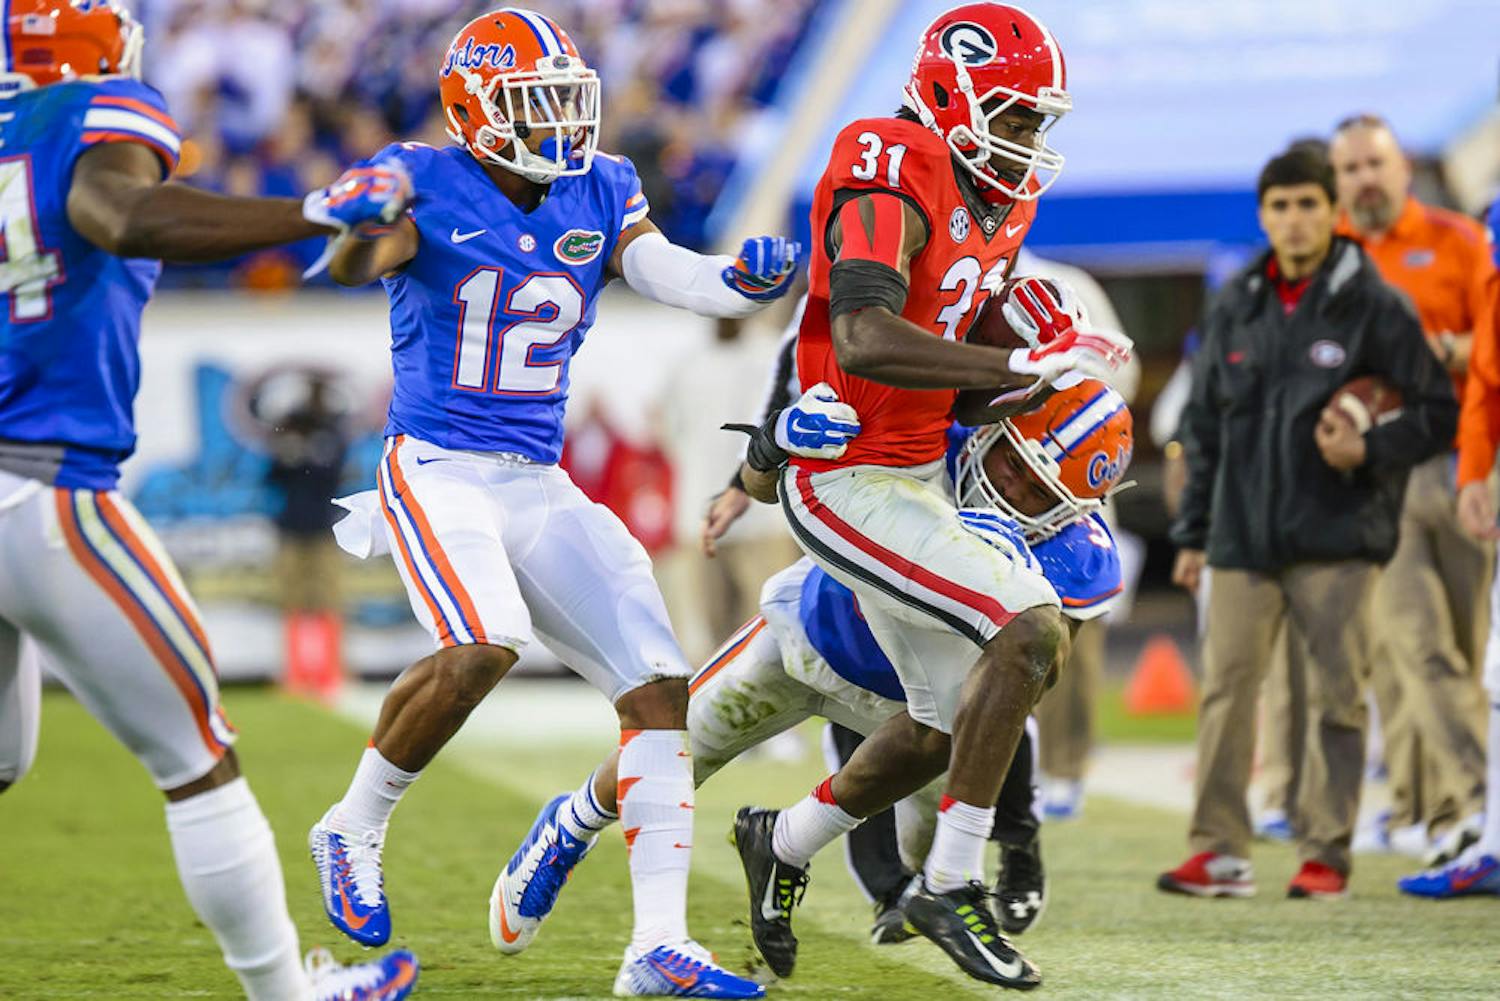 Antonio Morrison attempts a tackle during Florida's 38-20 win against Georgia on Nov. 1, 2014.